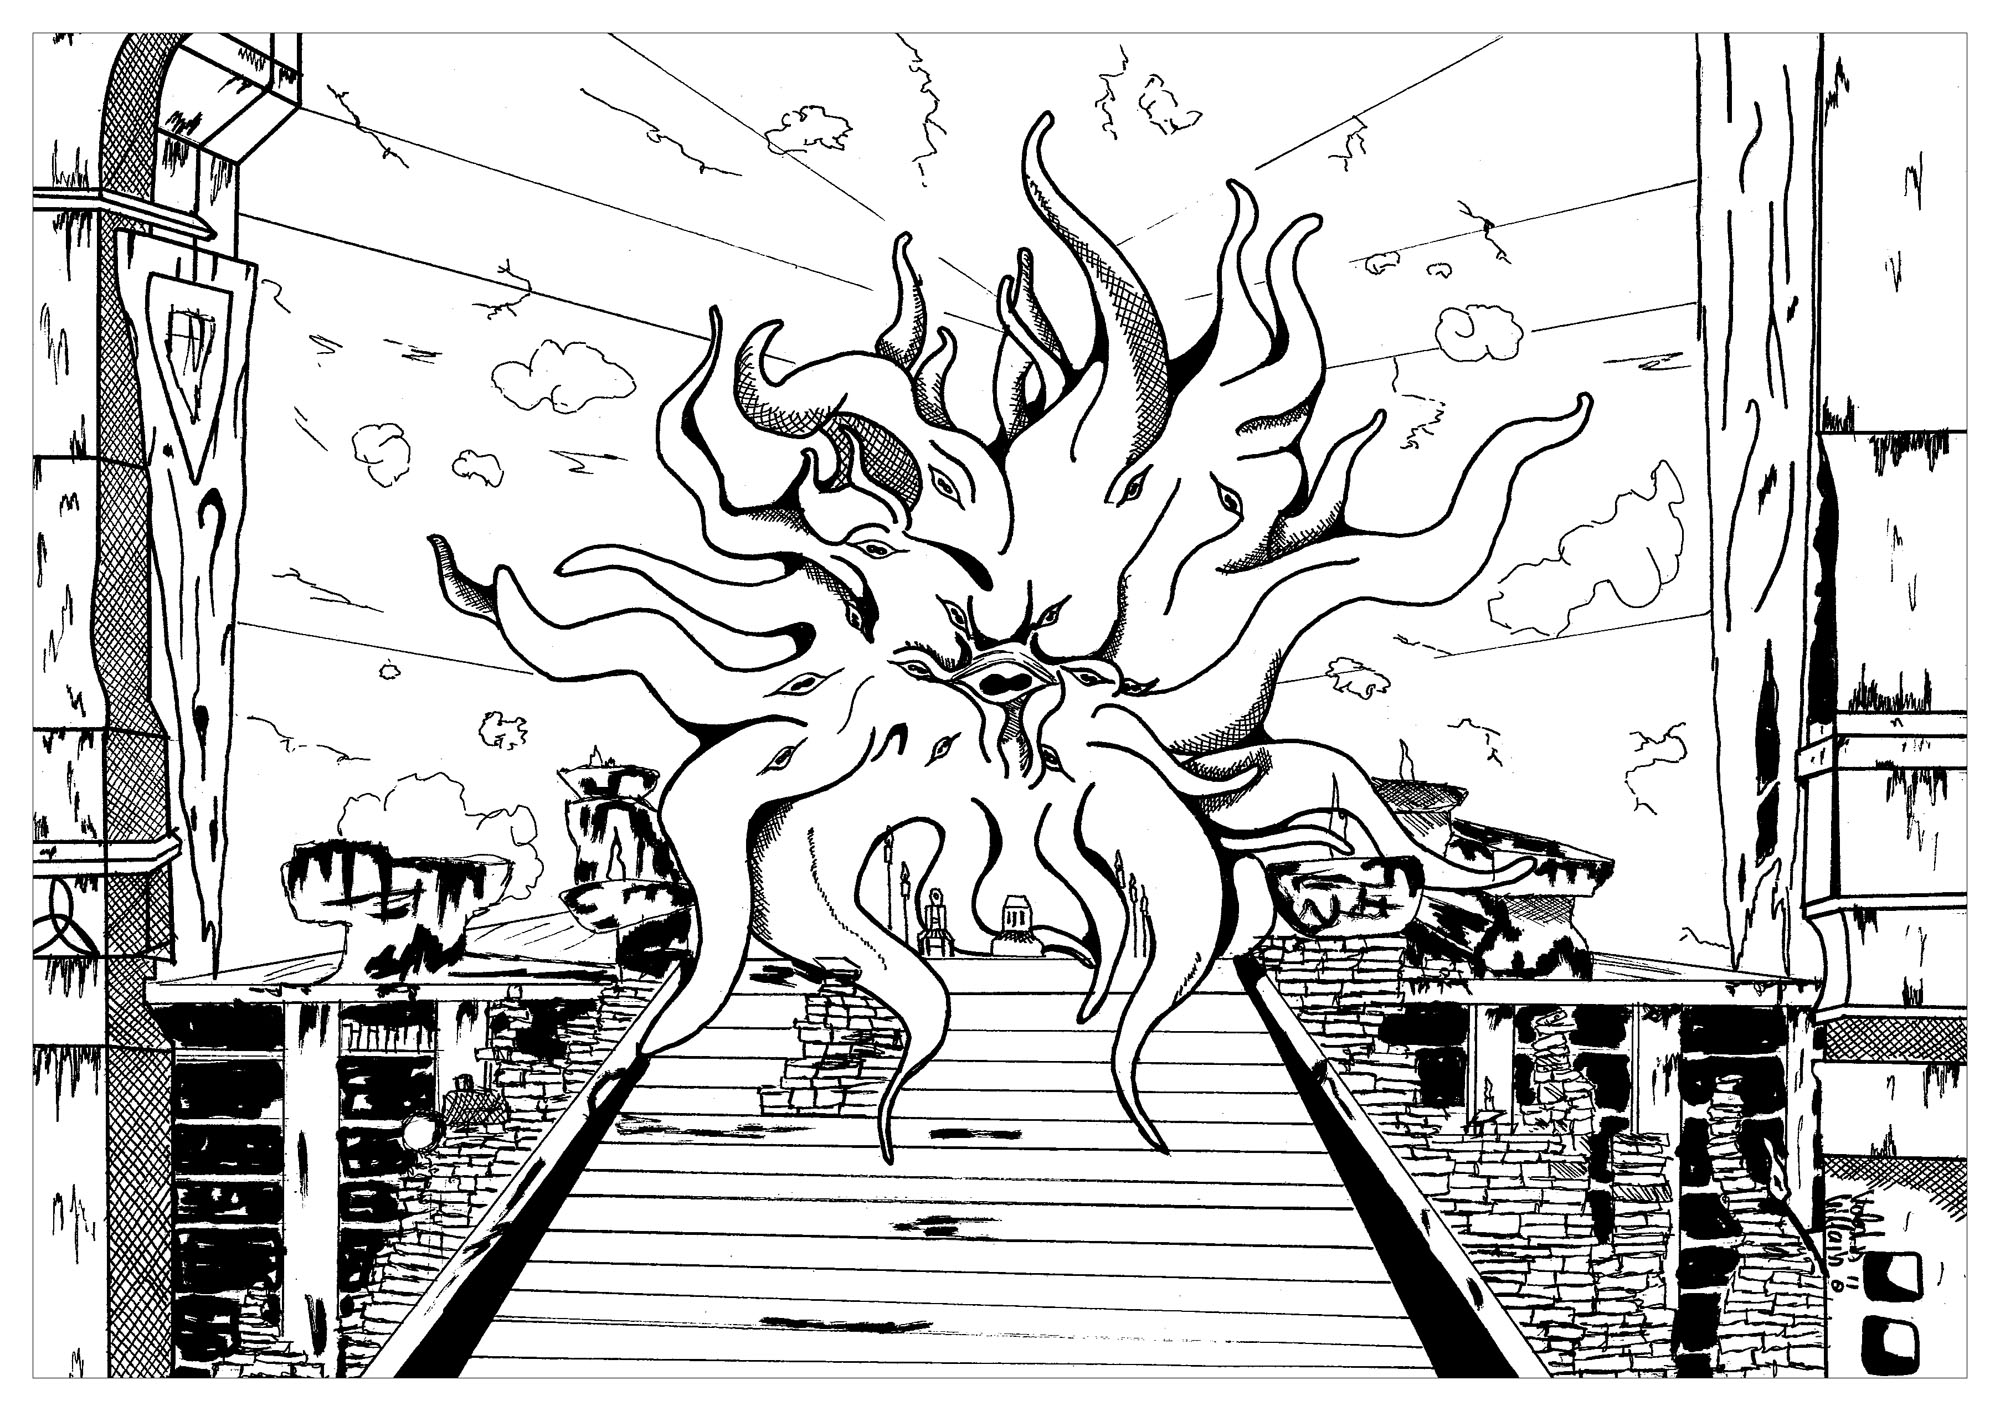 Coloring page inspired by video game Skyrim. Representation of Hermaeus Mora the Prince Daedra of the forests, the guardian of knowledge and memory, Artist : Valentin